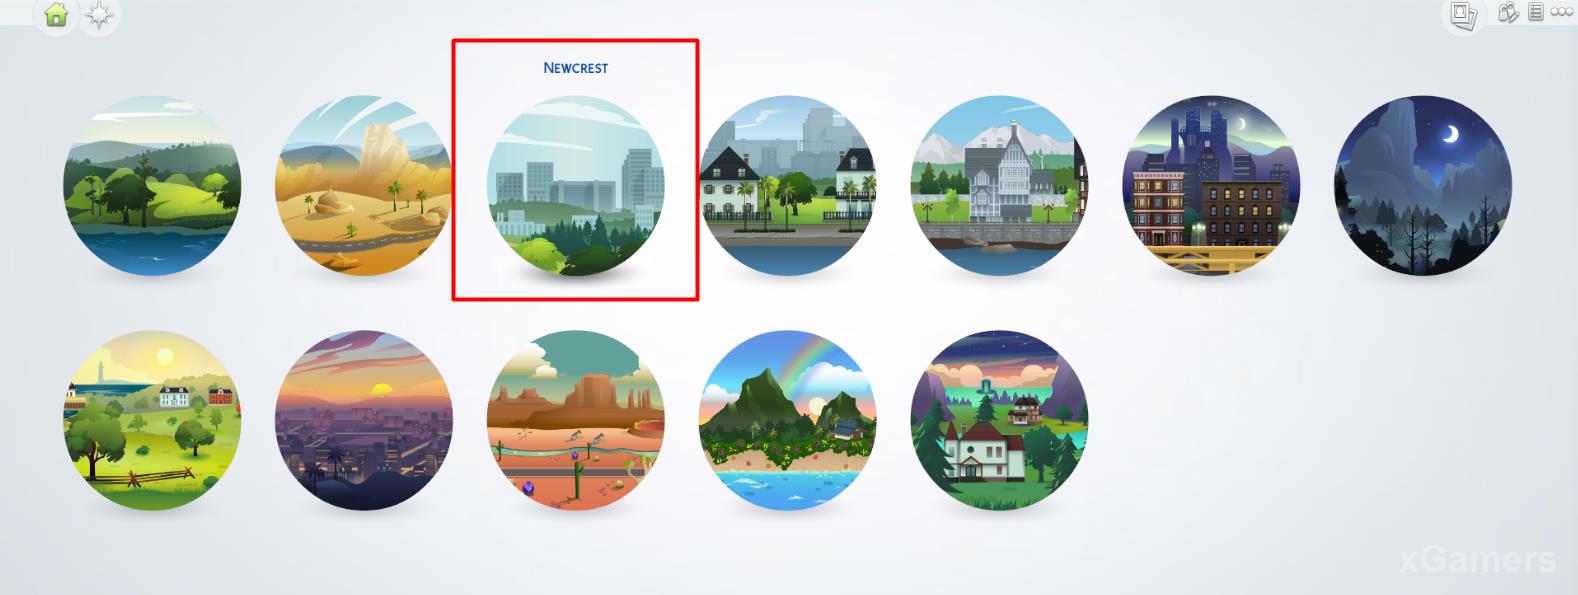 First you need to choose the desired town in our case it is Newcrest